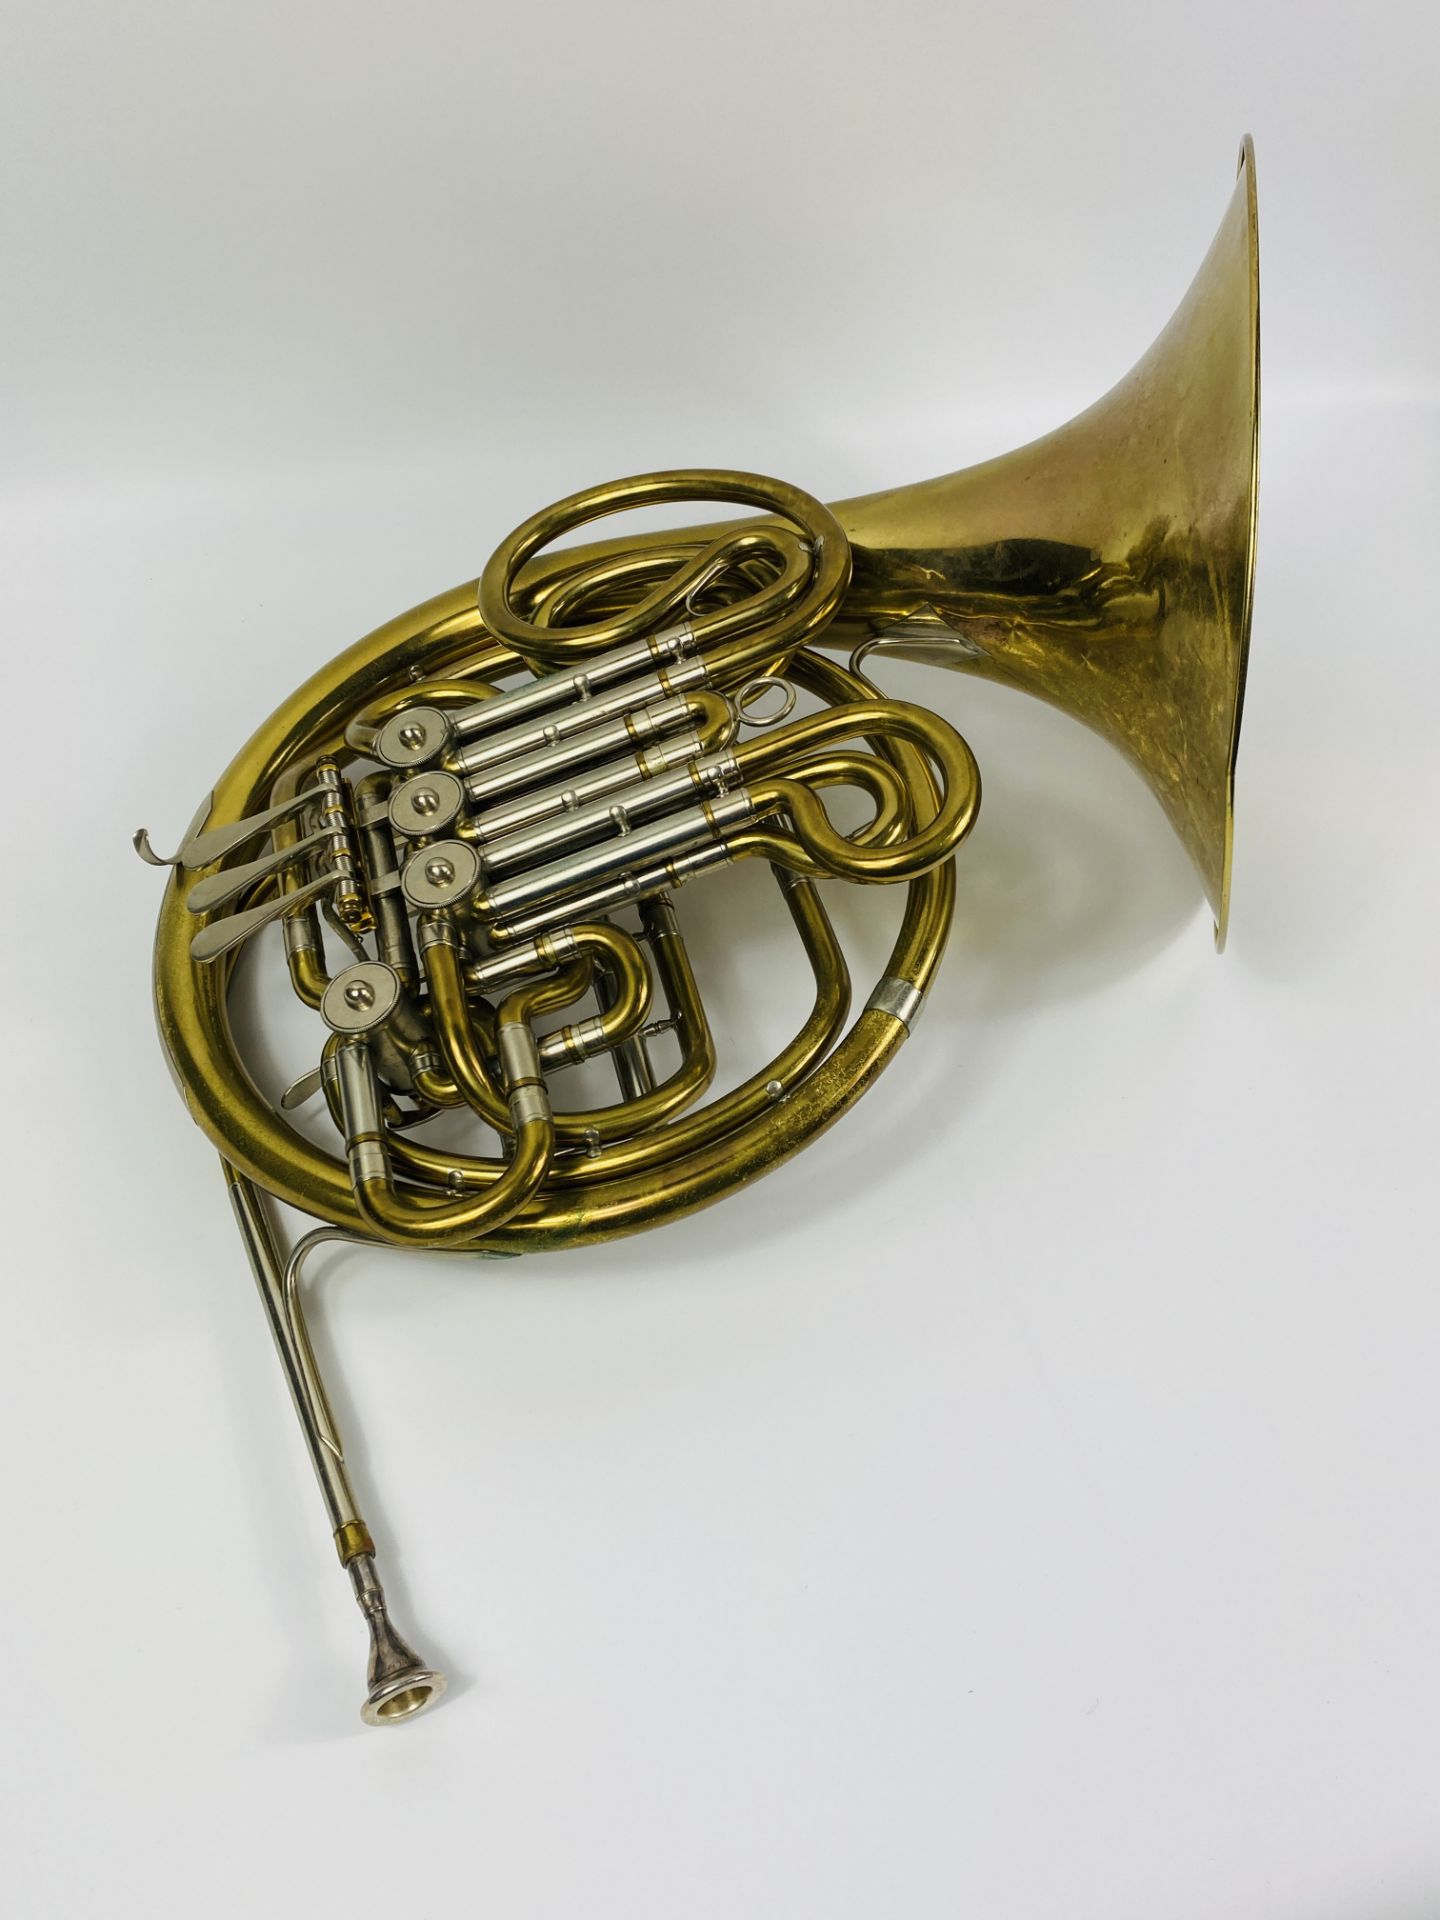 French horn in carry case - Image 6 of 8